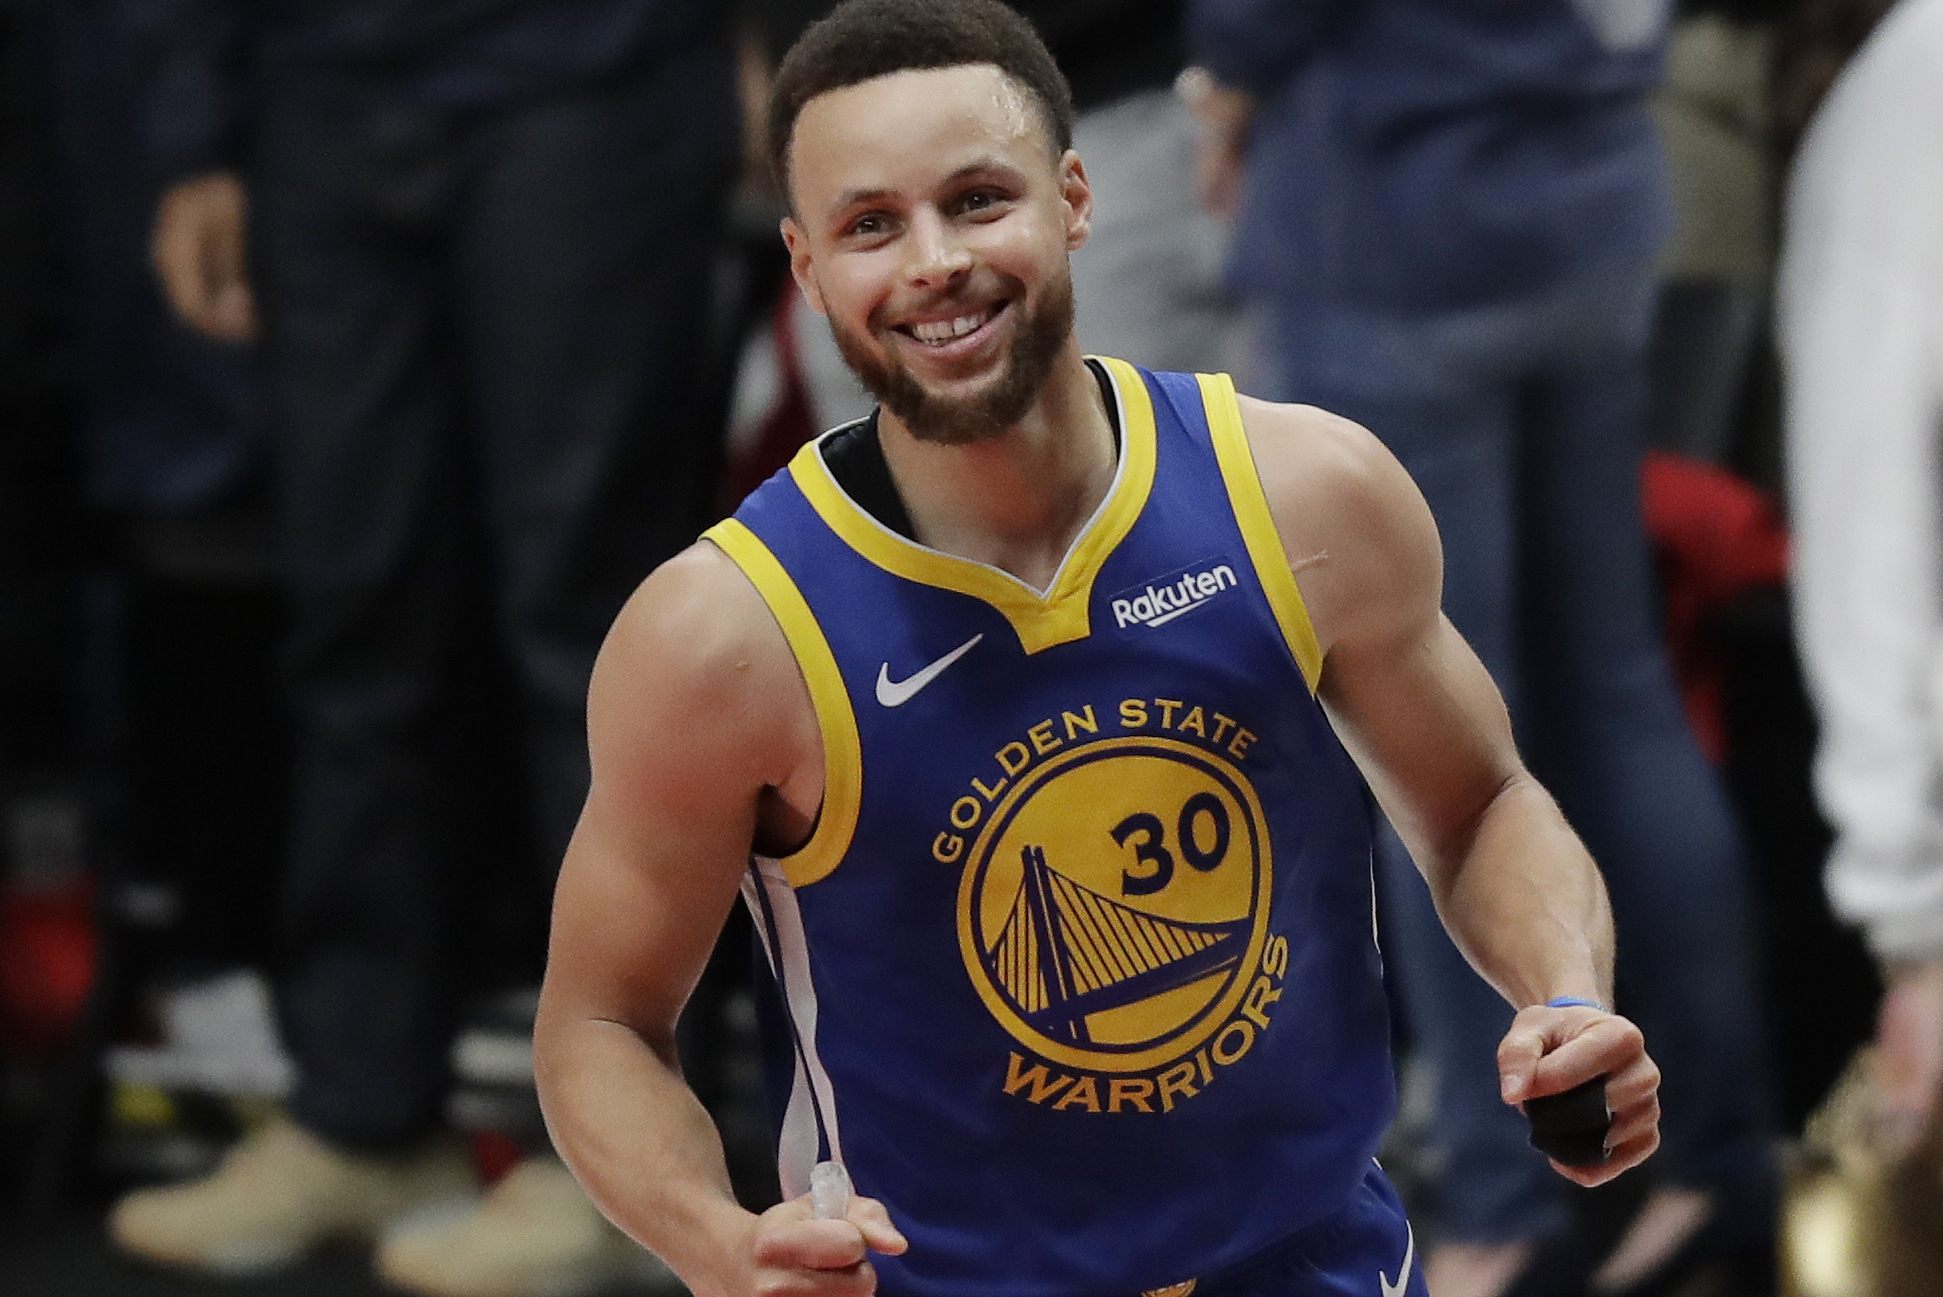 Warriors' Stephen Curry 'Definitely' Wants to Play for Team USA at 2020 Olympics